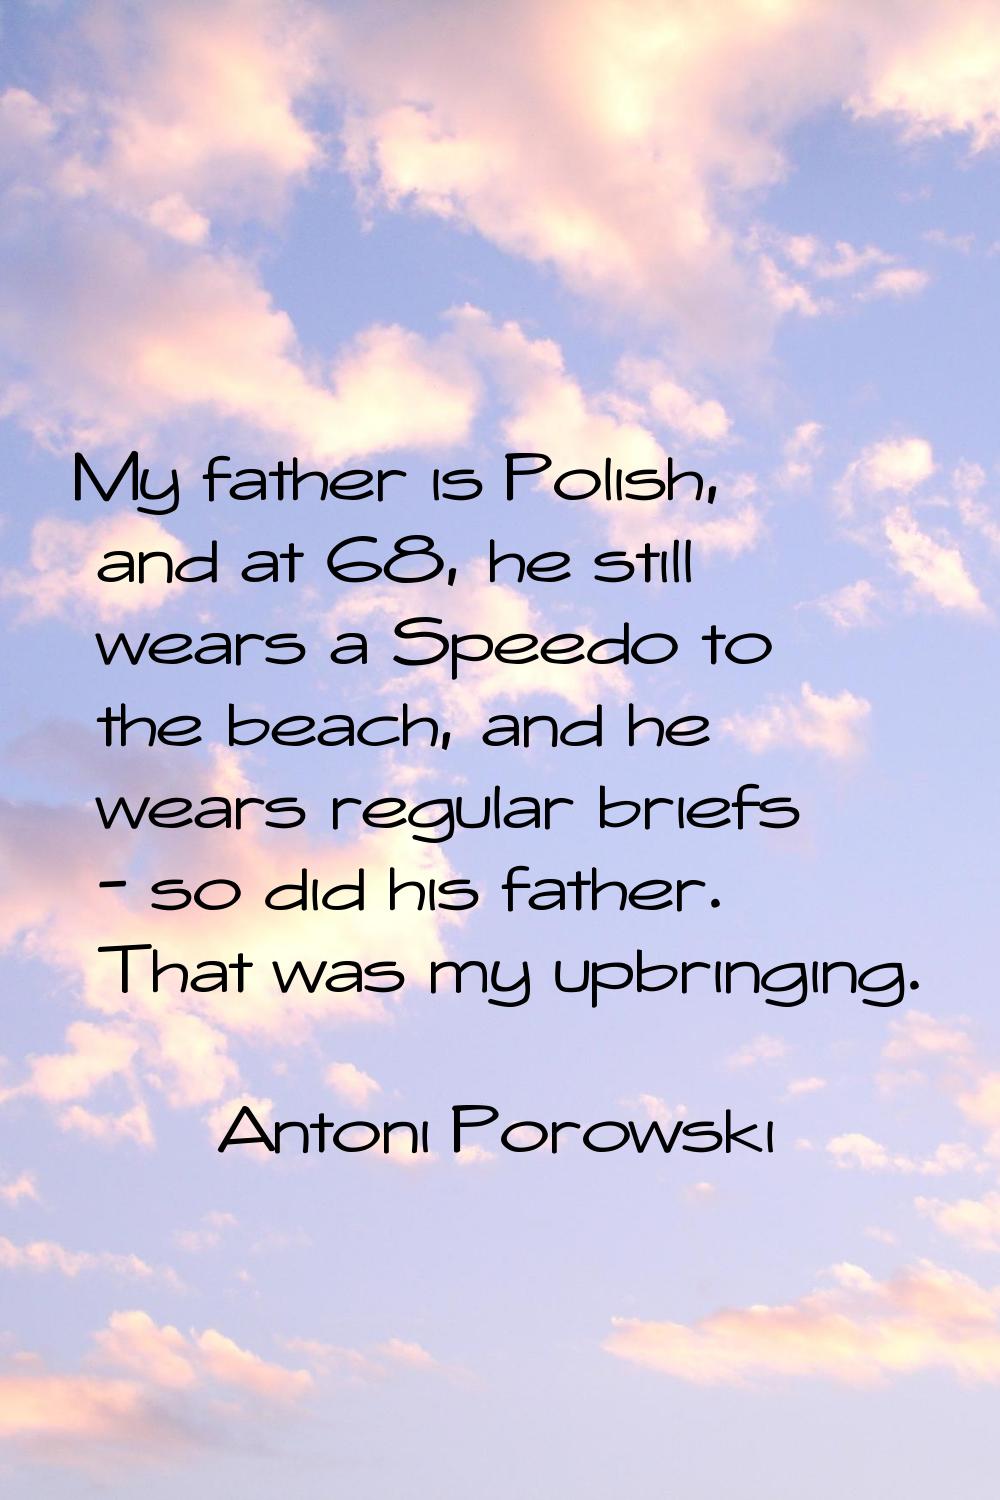 My father is Polish, and at 68, he still wears a Speedo to the beach, and he wears regular briefs -